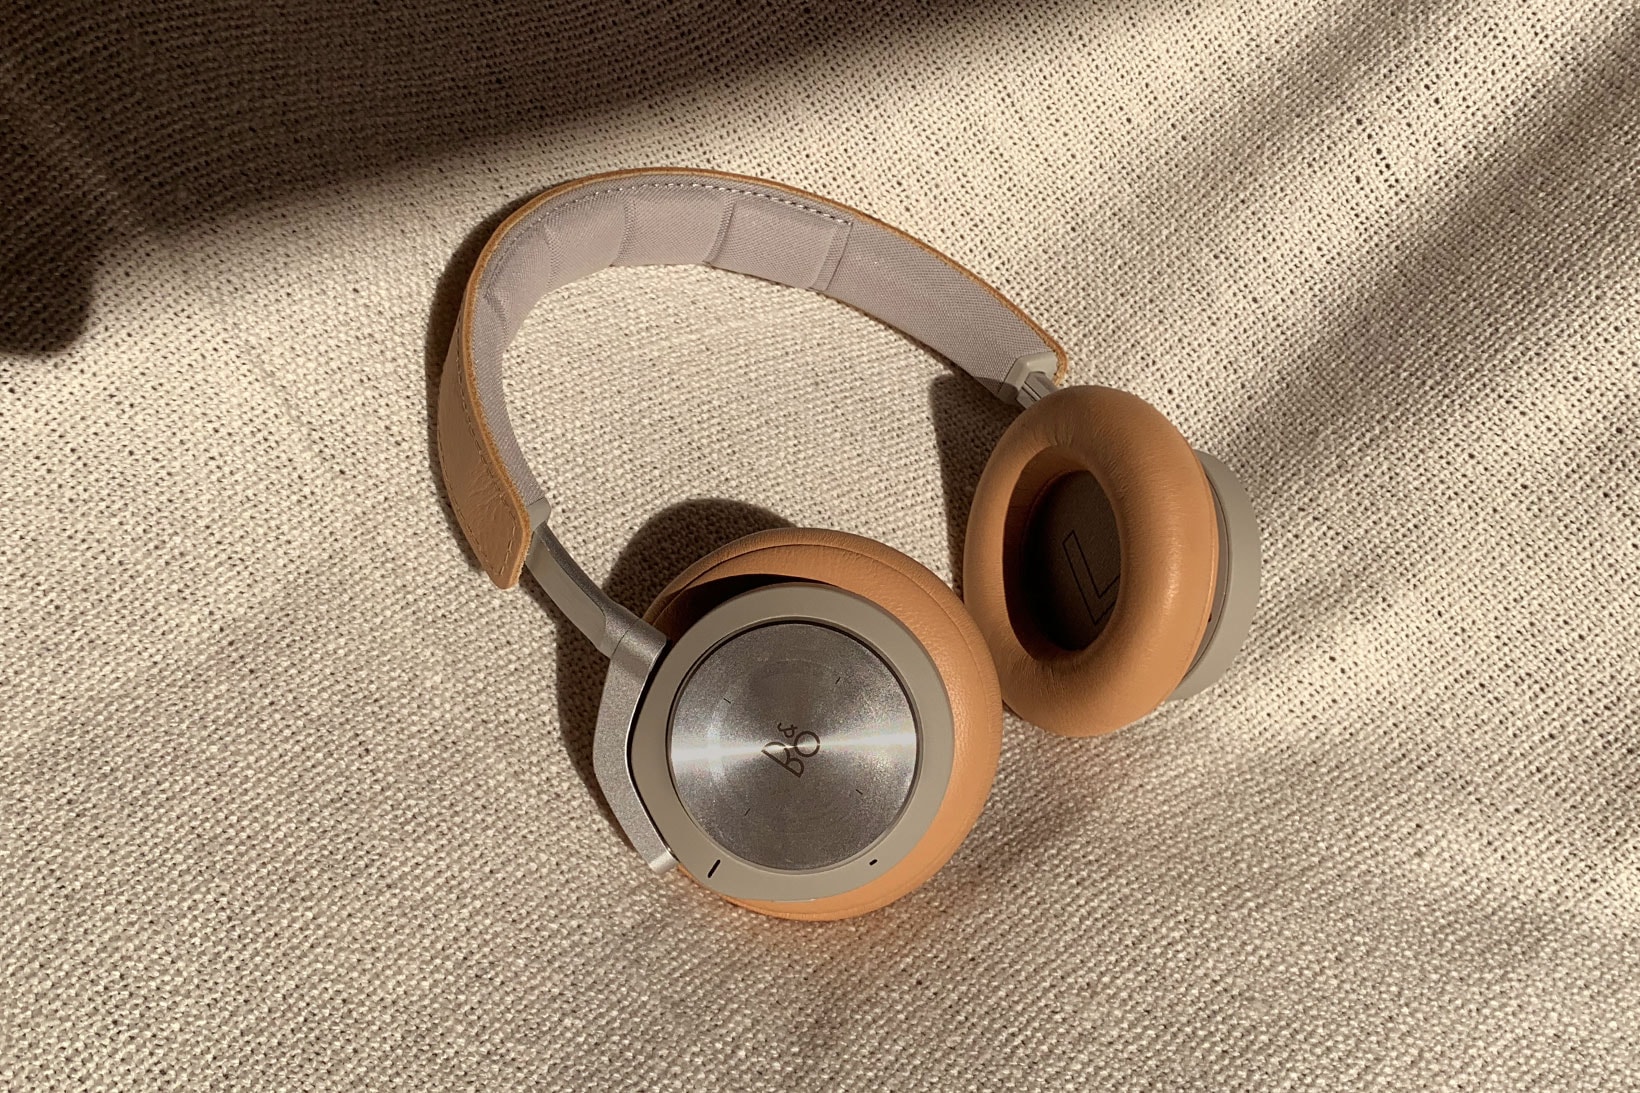 bang and olufsen beoplay h9i third generation headphones review price